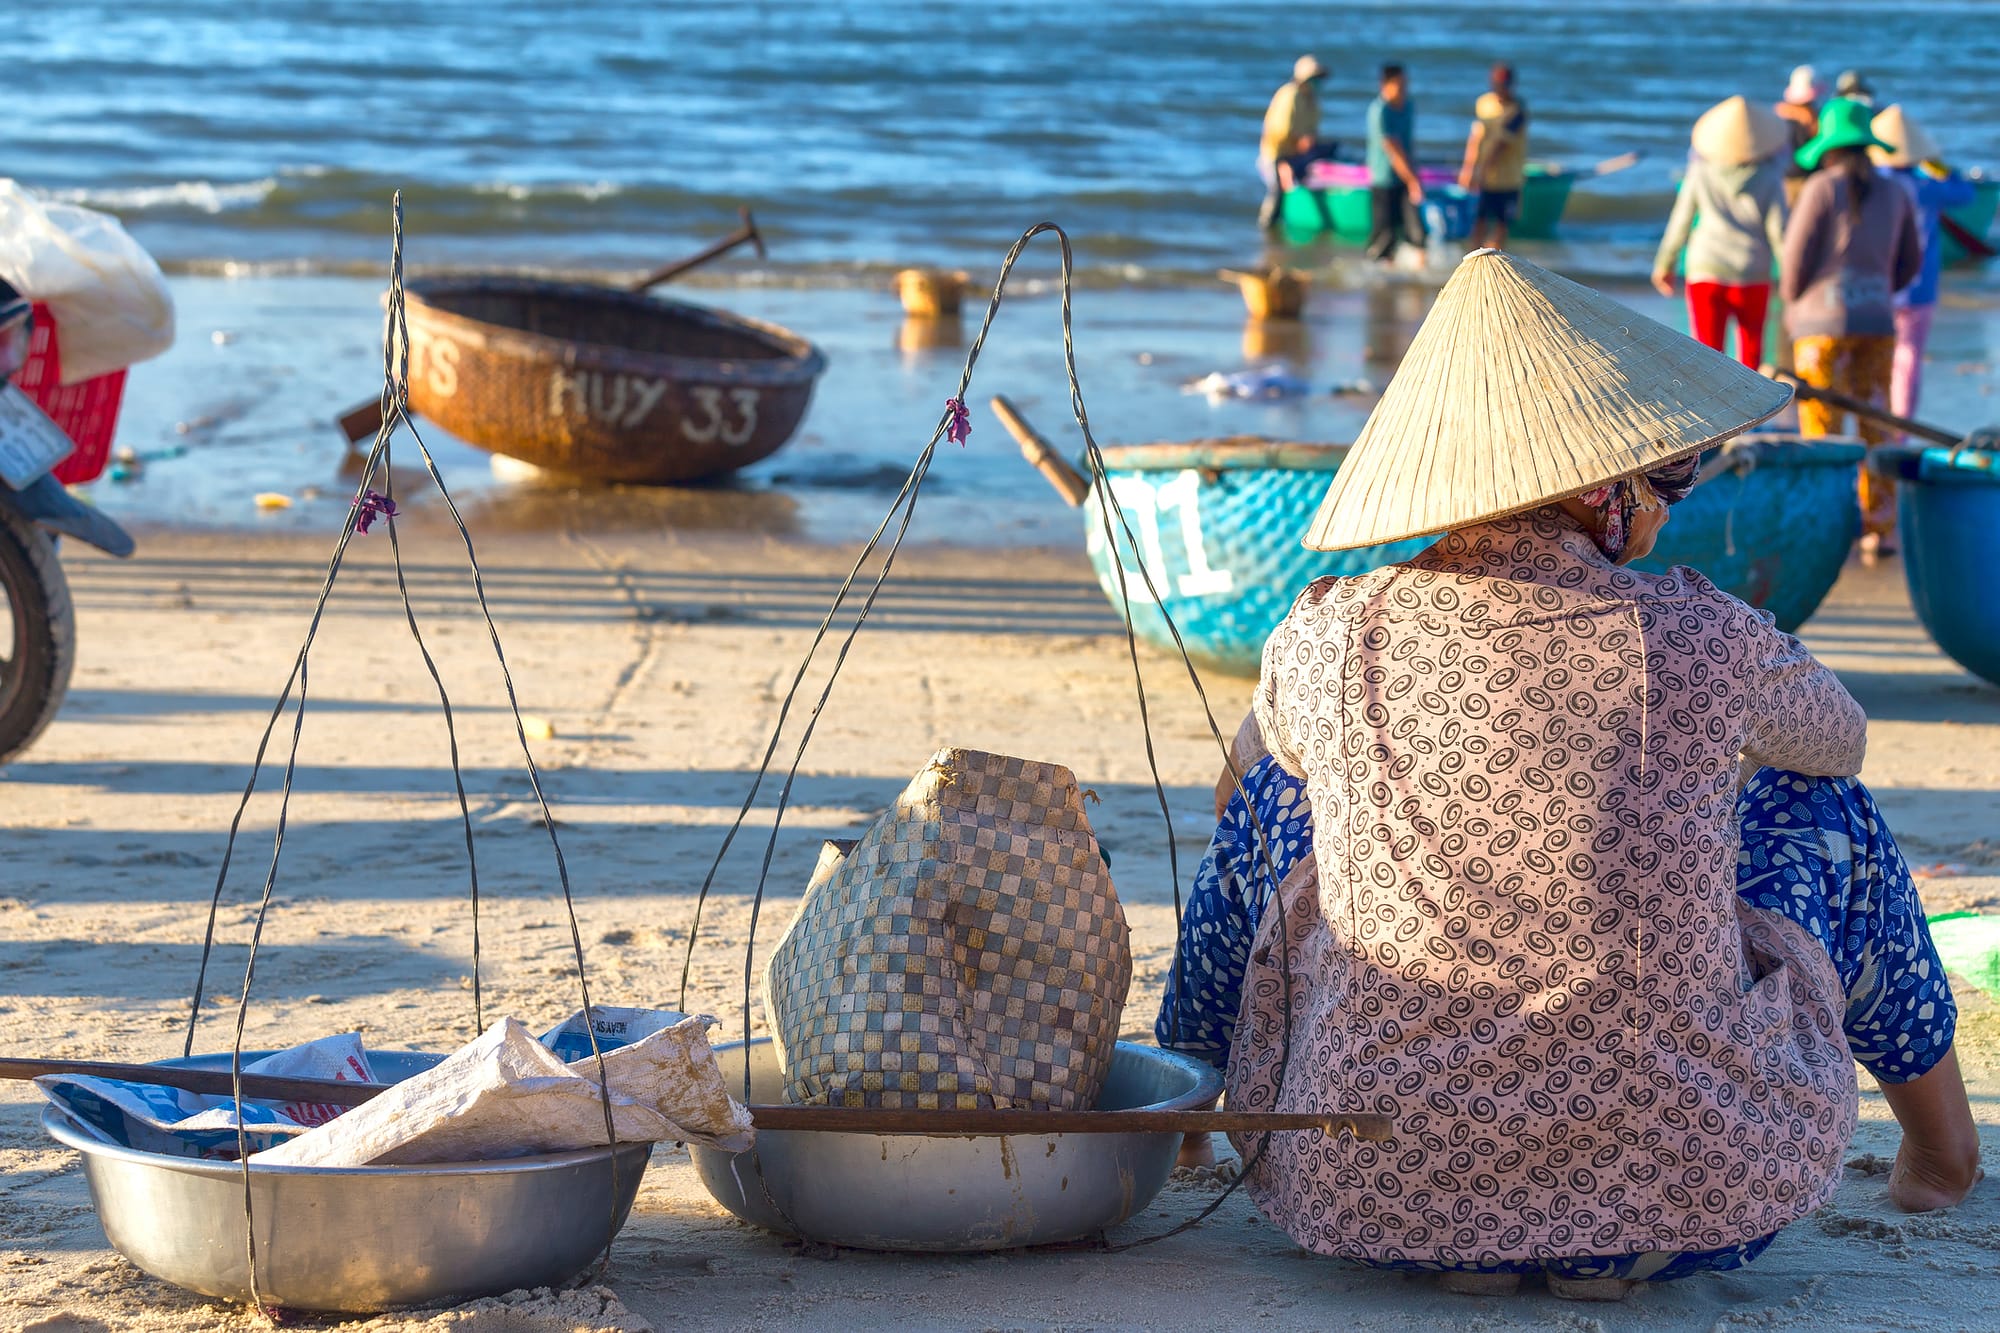 Binh Thuan, Vietnam - January 21st, 2016: Woman with shoulder alignment is waiting for fishermen to bring the beach to buy fish for sale in the morning market in the fishing village of Binh Thuan, Vietnam